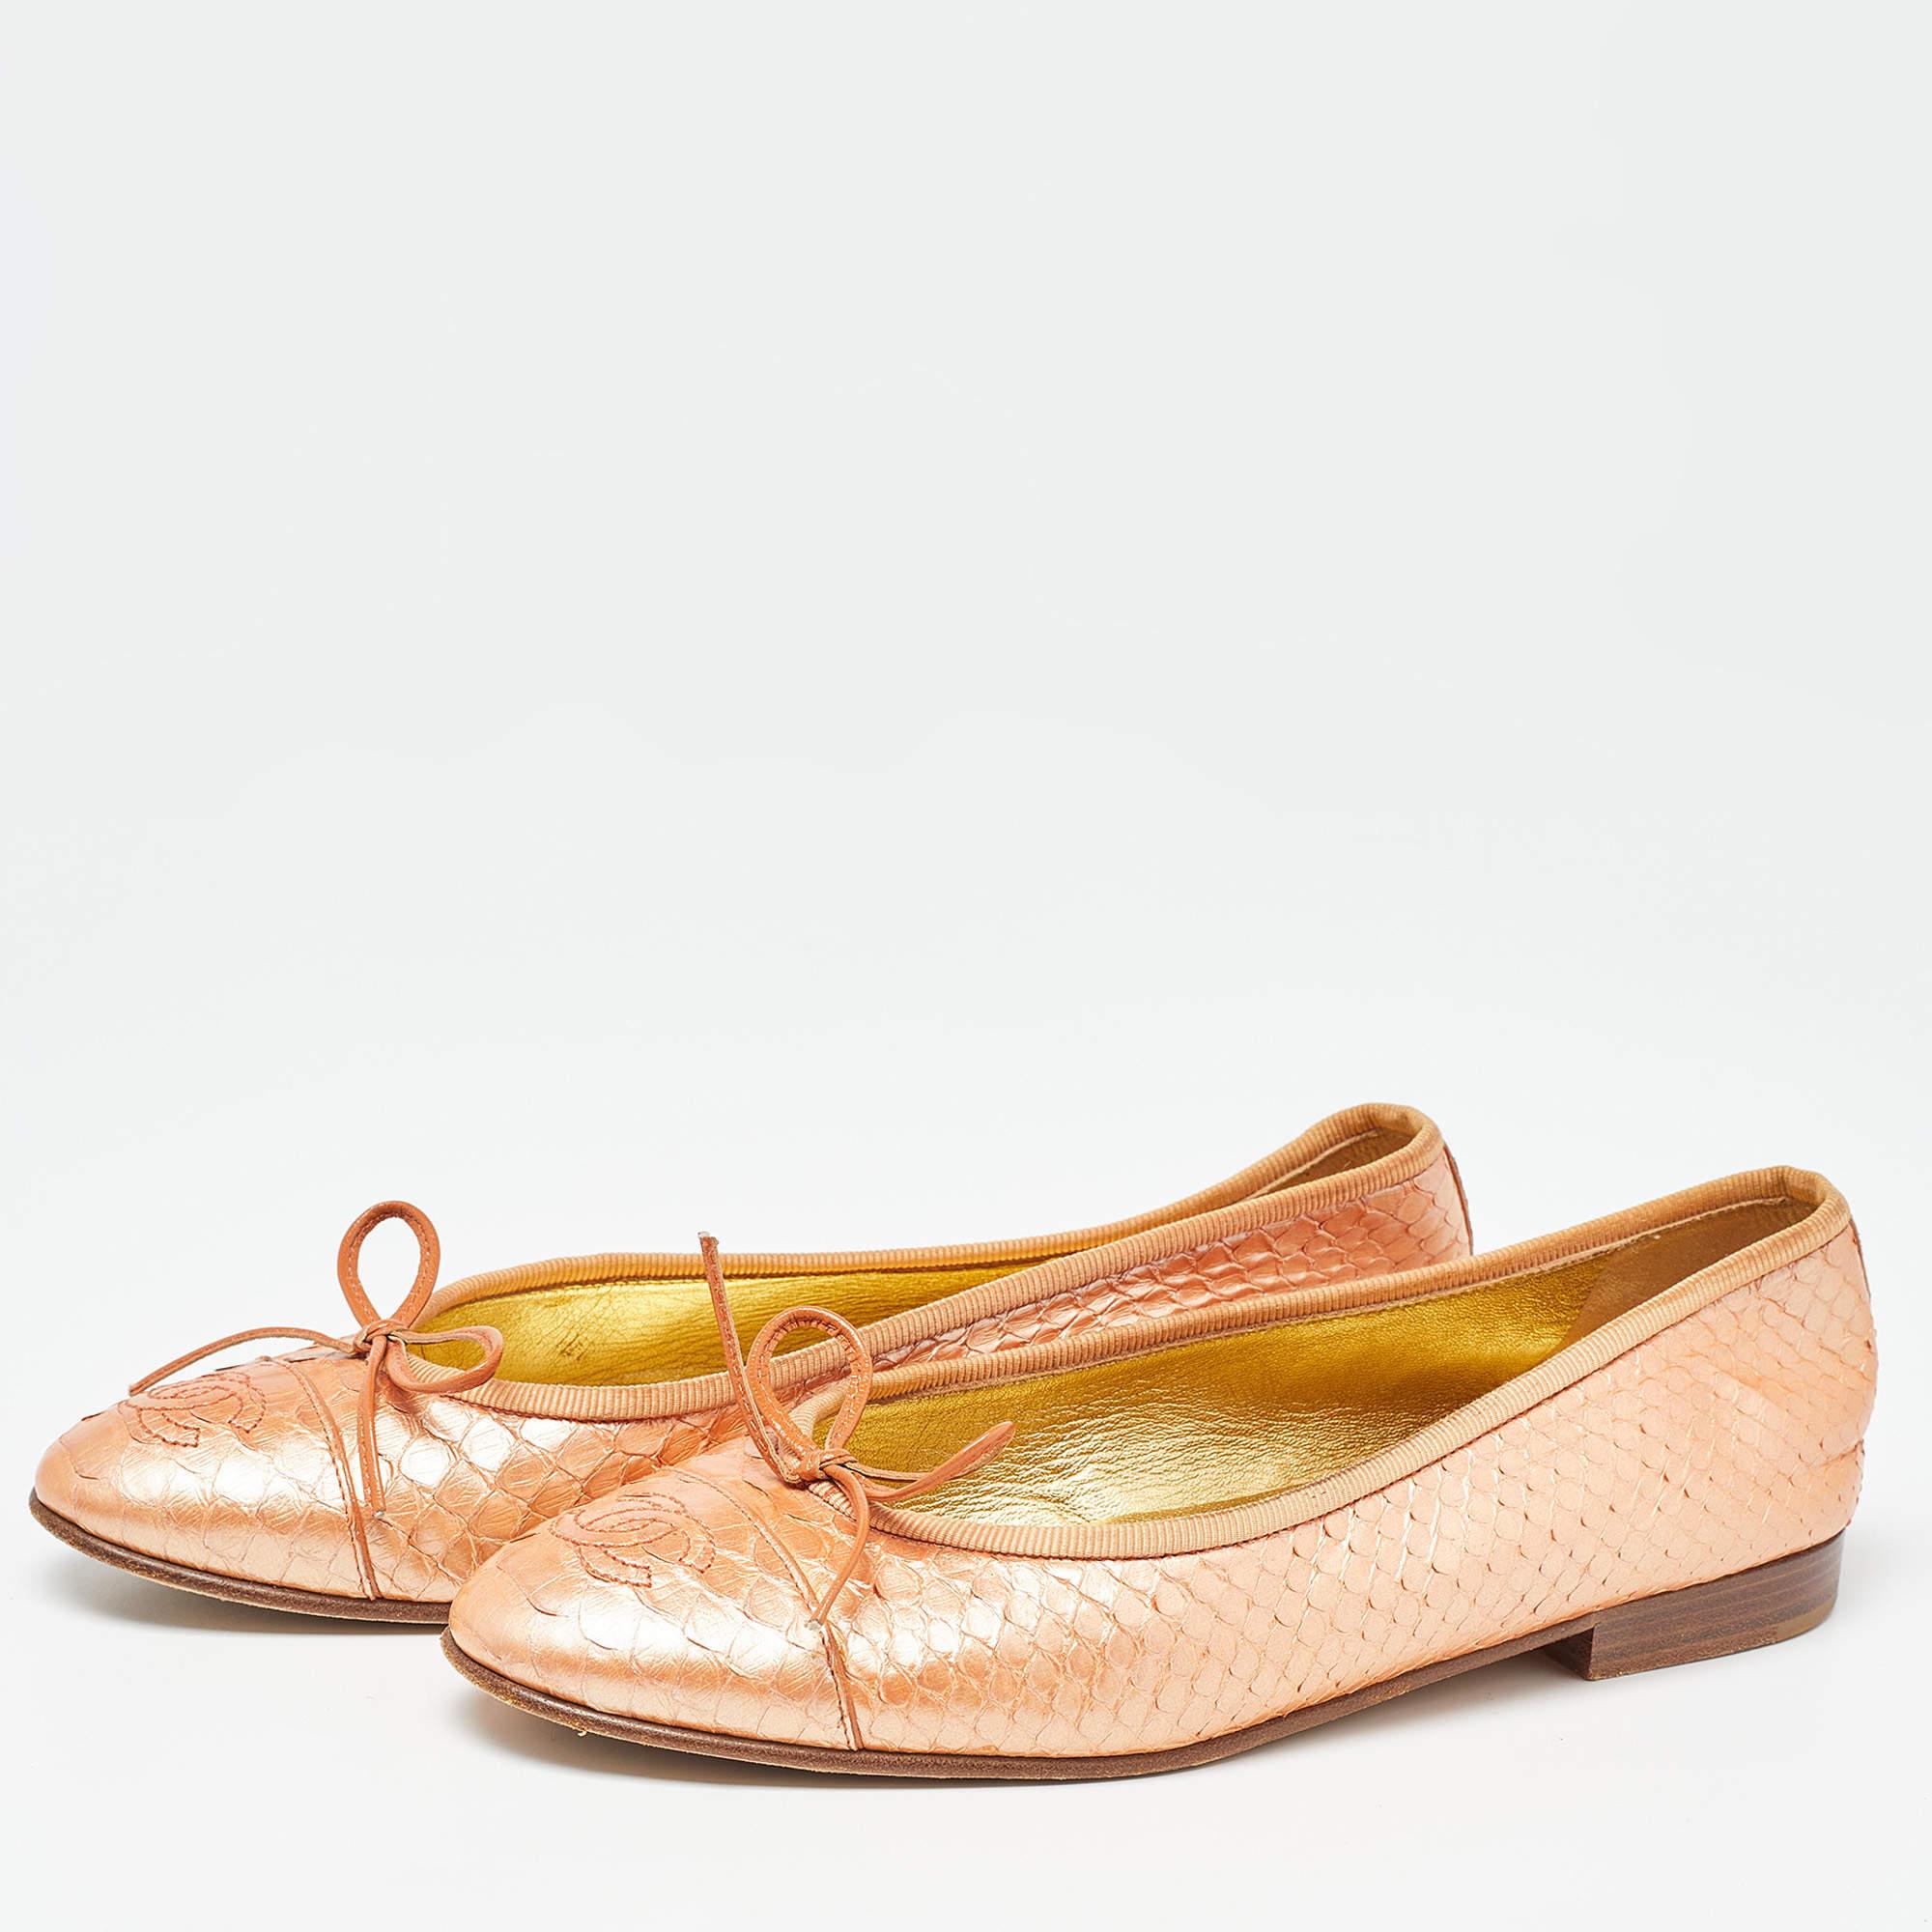 A common sight in the closets of fashionistas is a pair of Chanel ballet flats. They are perfect to wear on busy days and just stylish enough to assist one's style. These are crafted from python leather and feature the CC logo and bow details.

